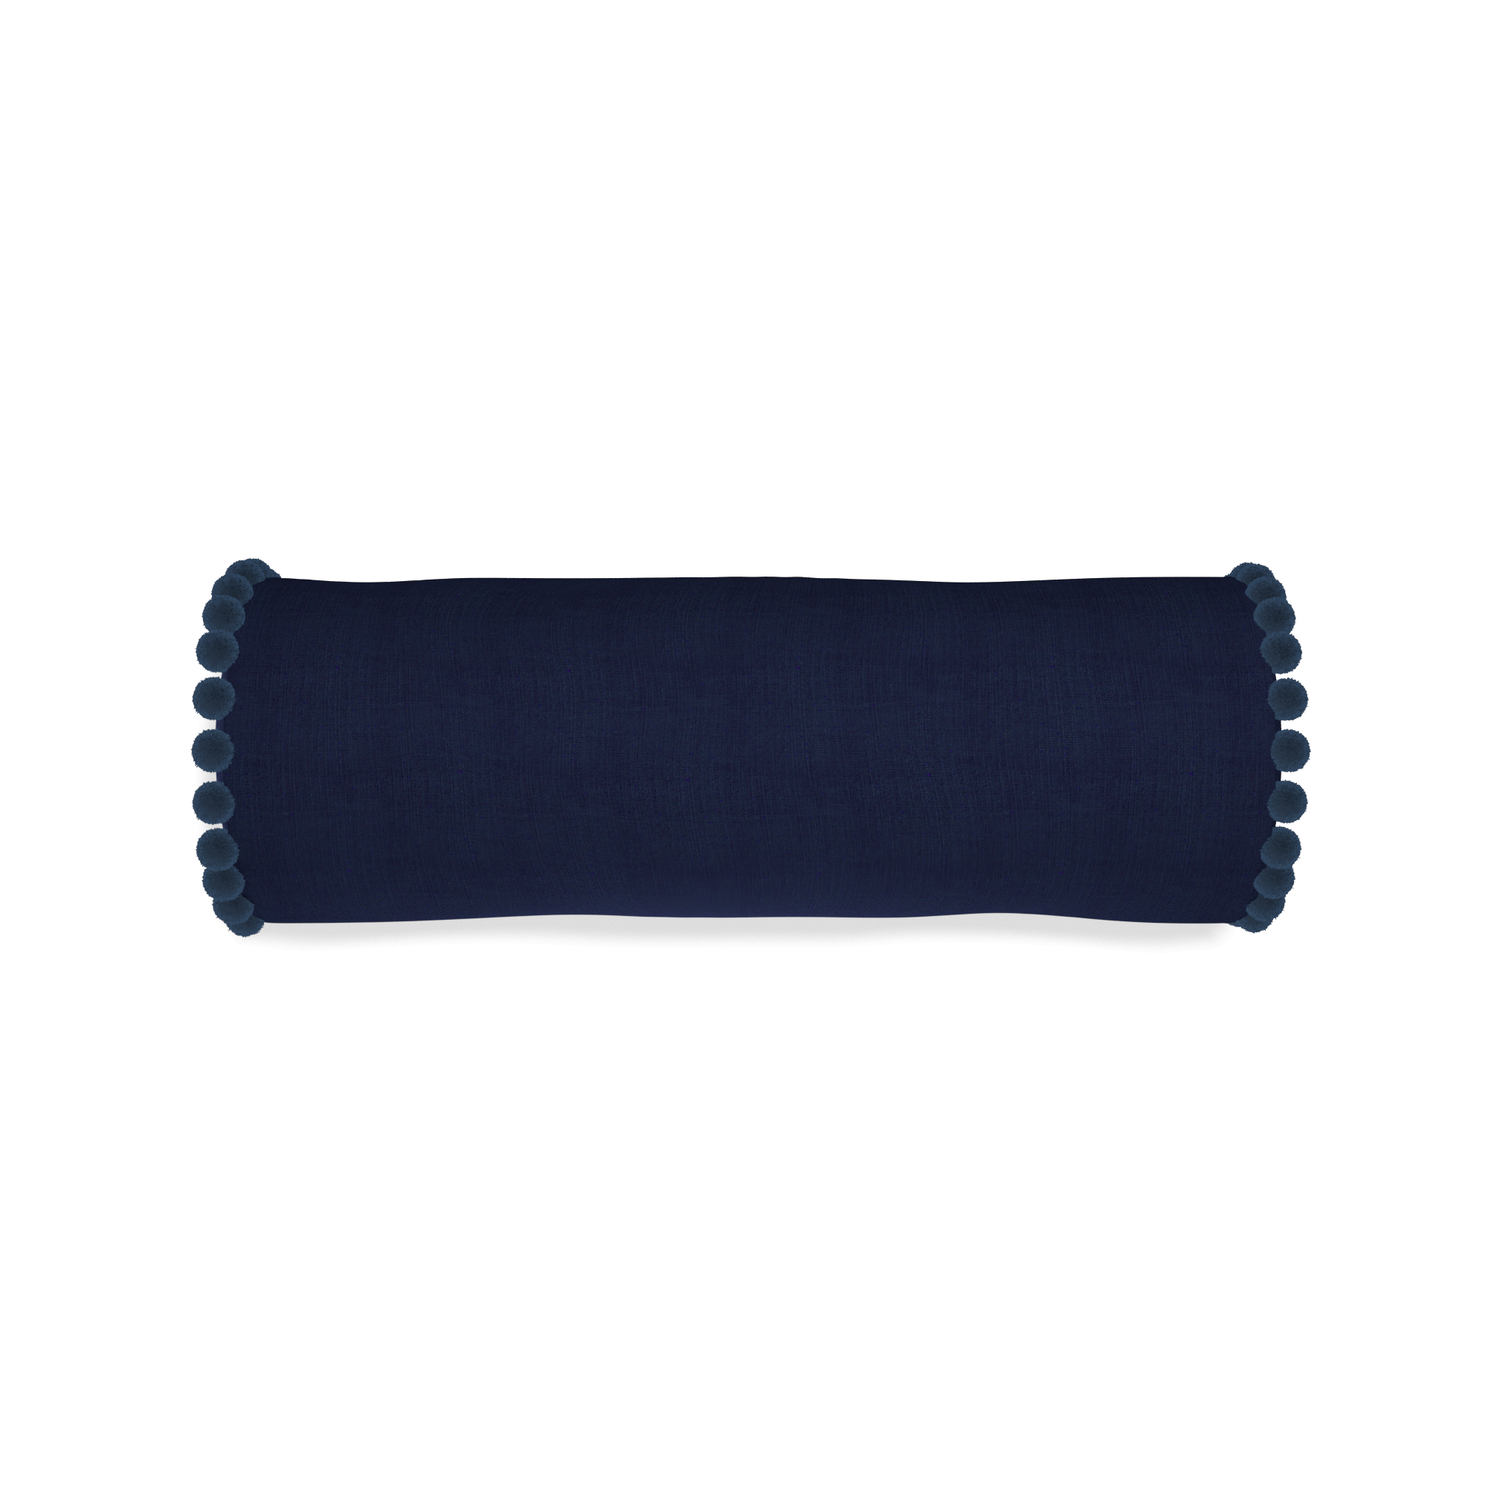 Bolster midnight custom navy bluepillow with c on white background